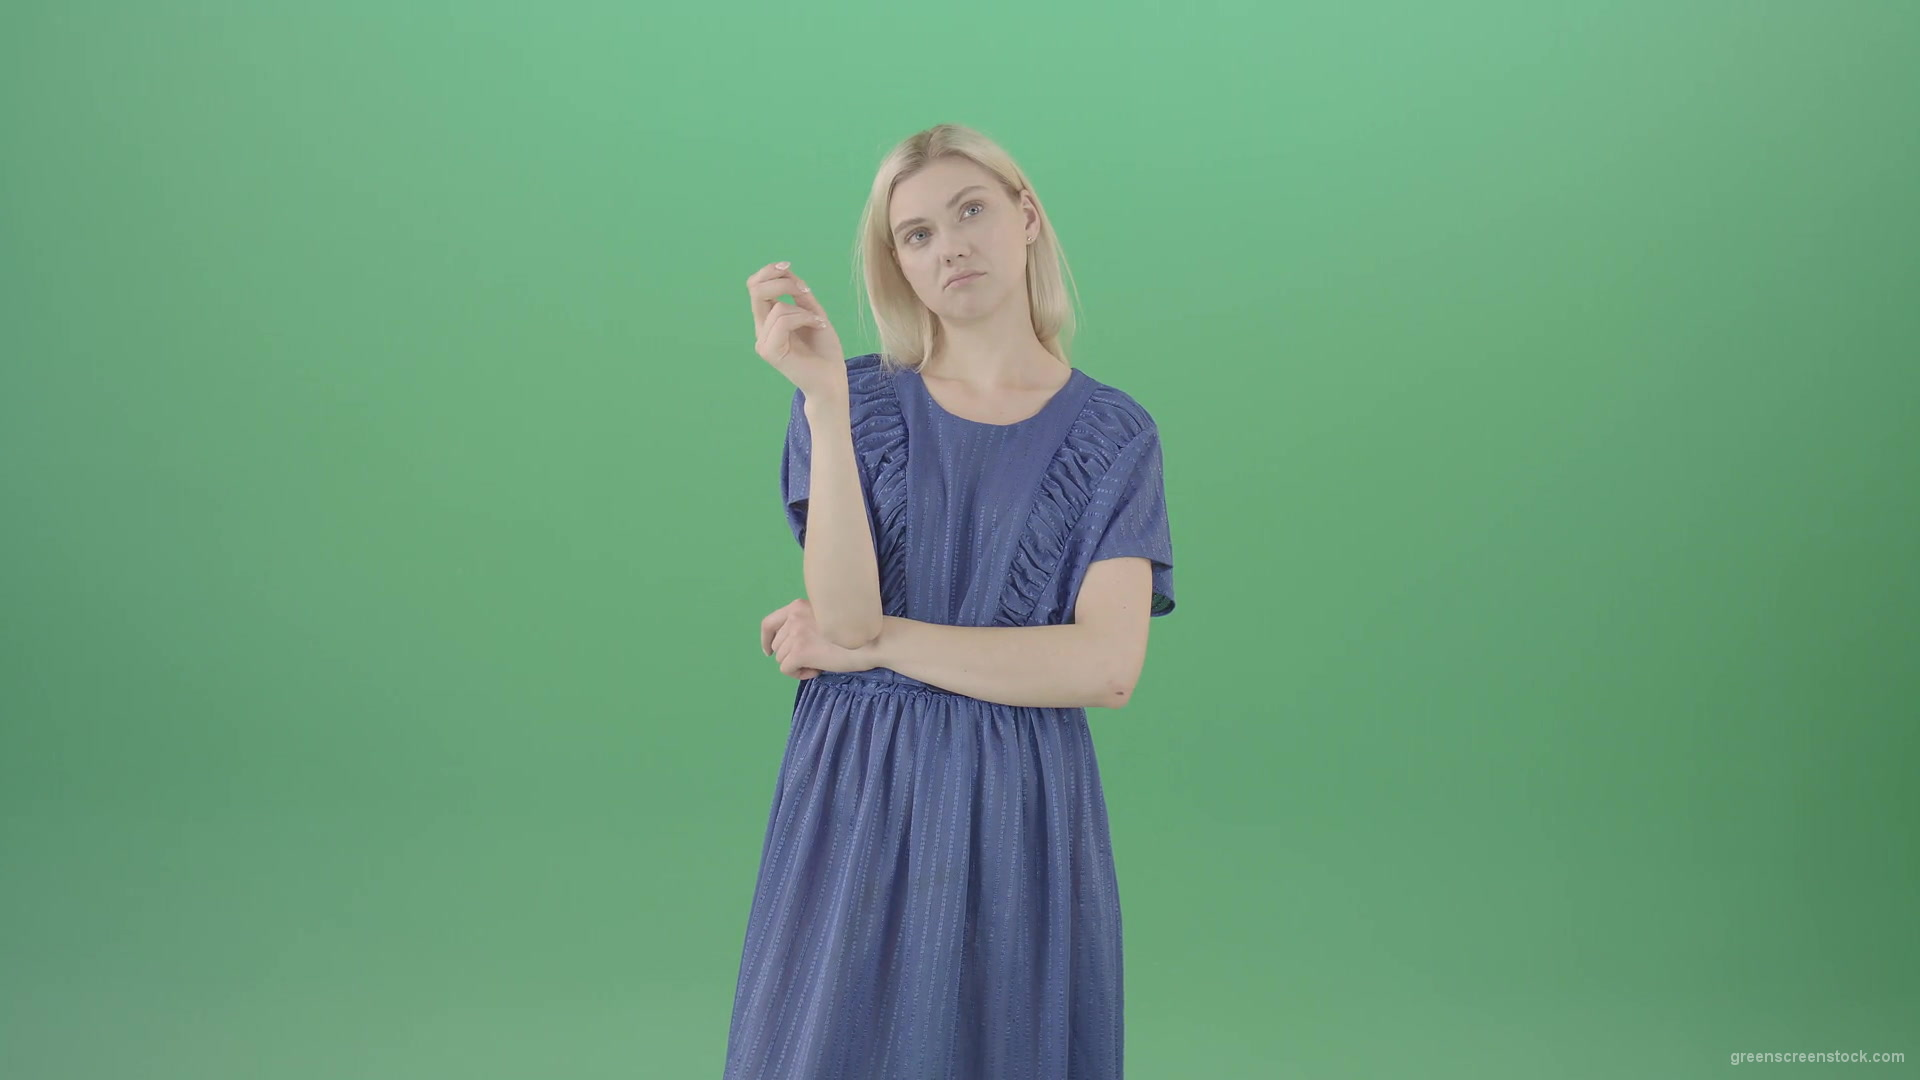 Boring-housewife-in-blue-dress-slide-virtual-products-on-touch-screen-shop-4K-Green-Screen-Video-Footage--1920_004 Green Screen Stock